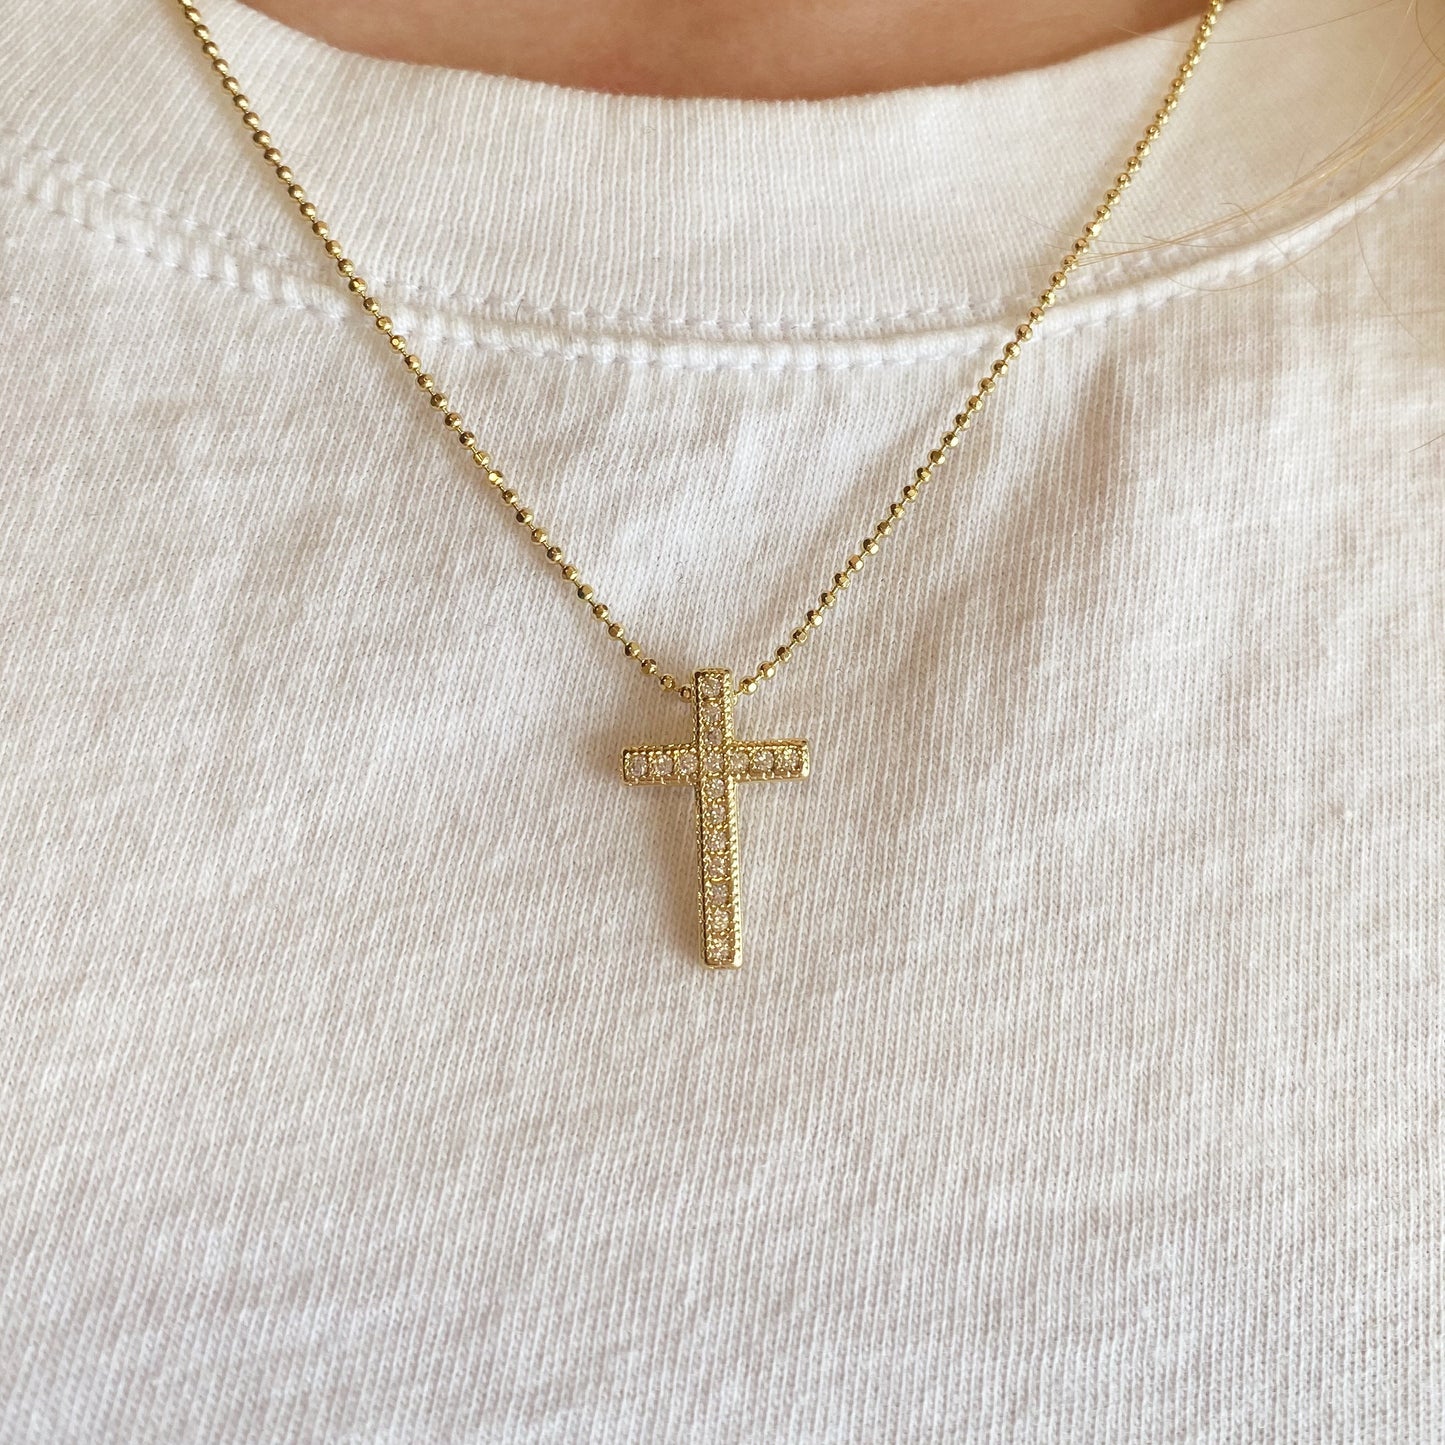 18k Gold Filled Cross Pendant With Micro Cubic Zircon Stones